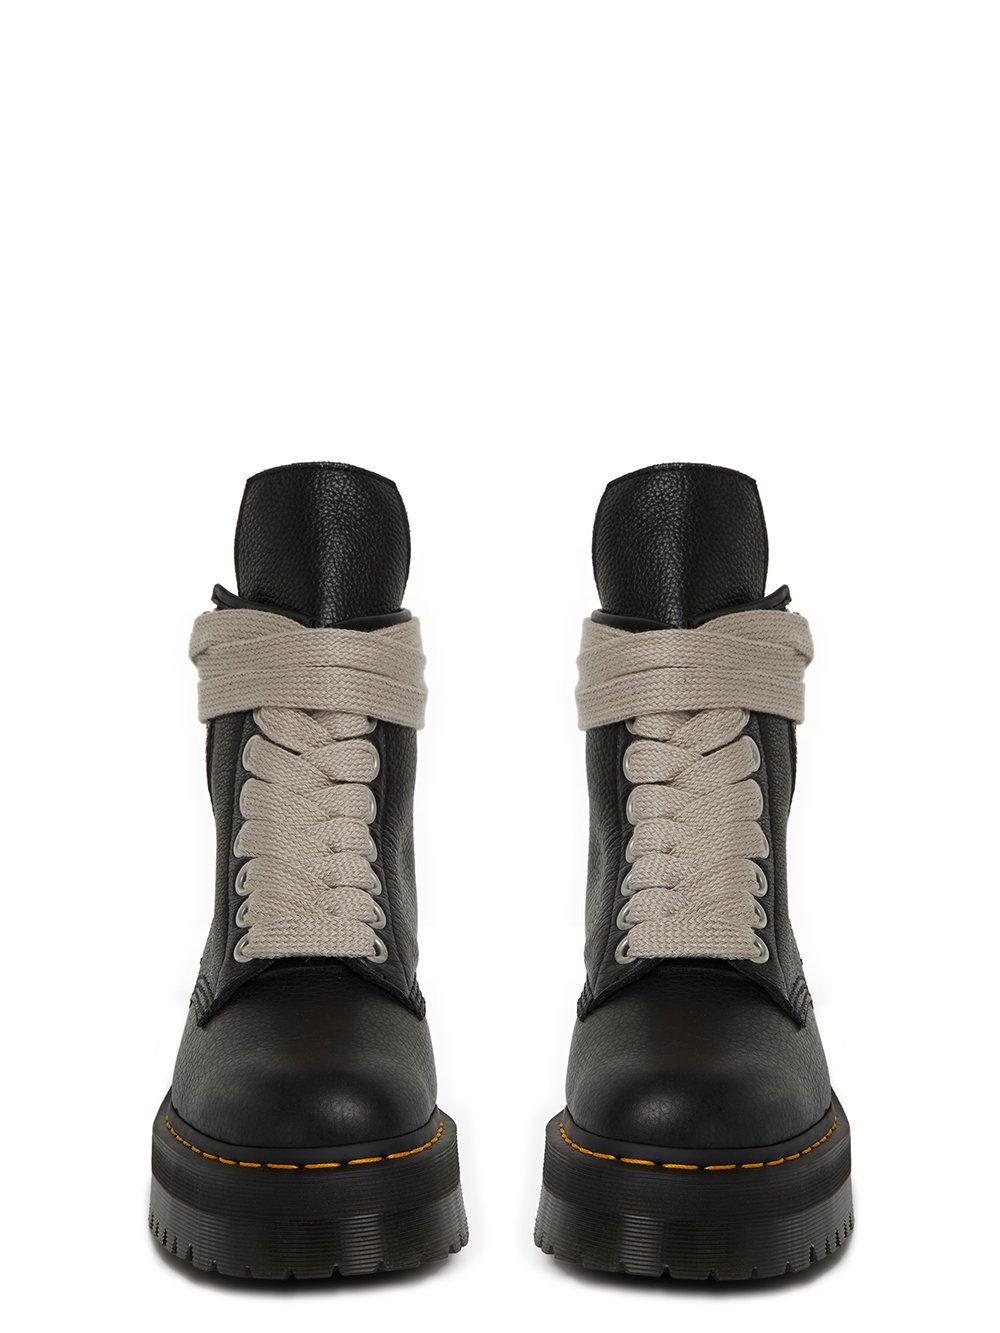 DR. MARTENS x RICK OWENS FW22 STROBE 1460 DR MARTENS BLACK BOOT IN MATTE GRAINY COW LEATHER. 